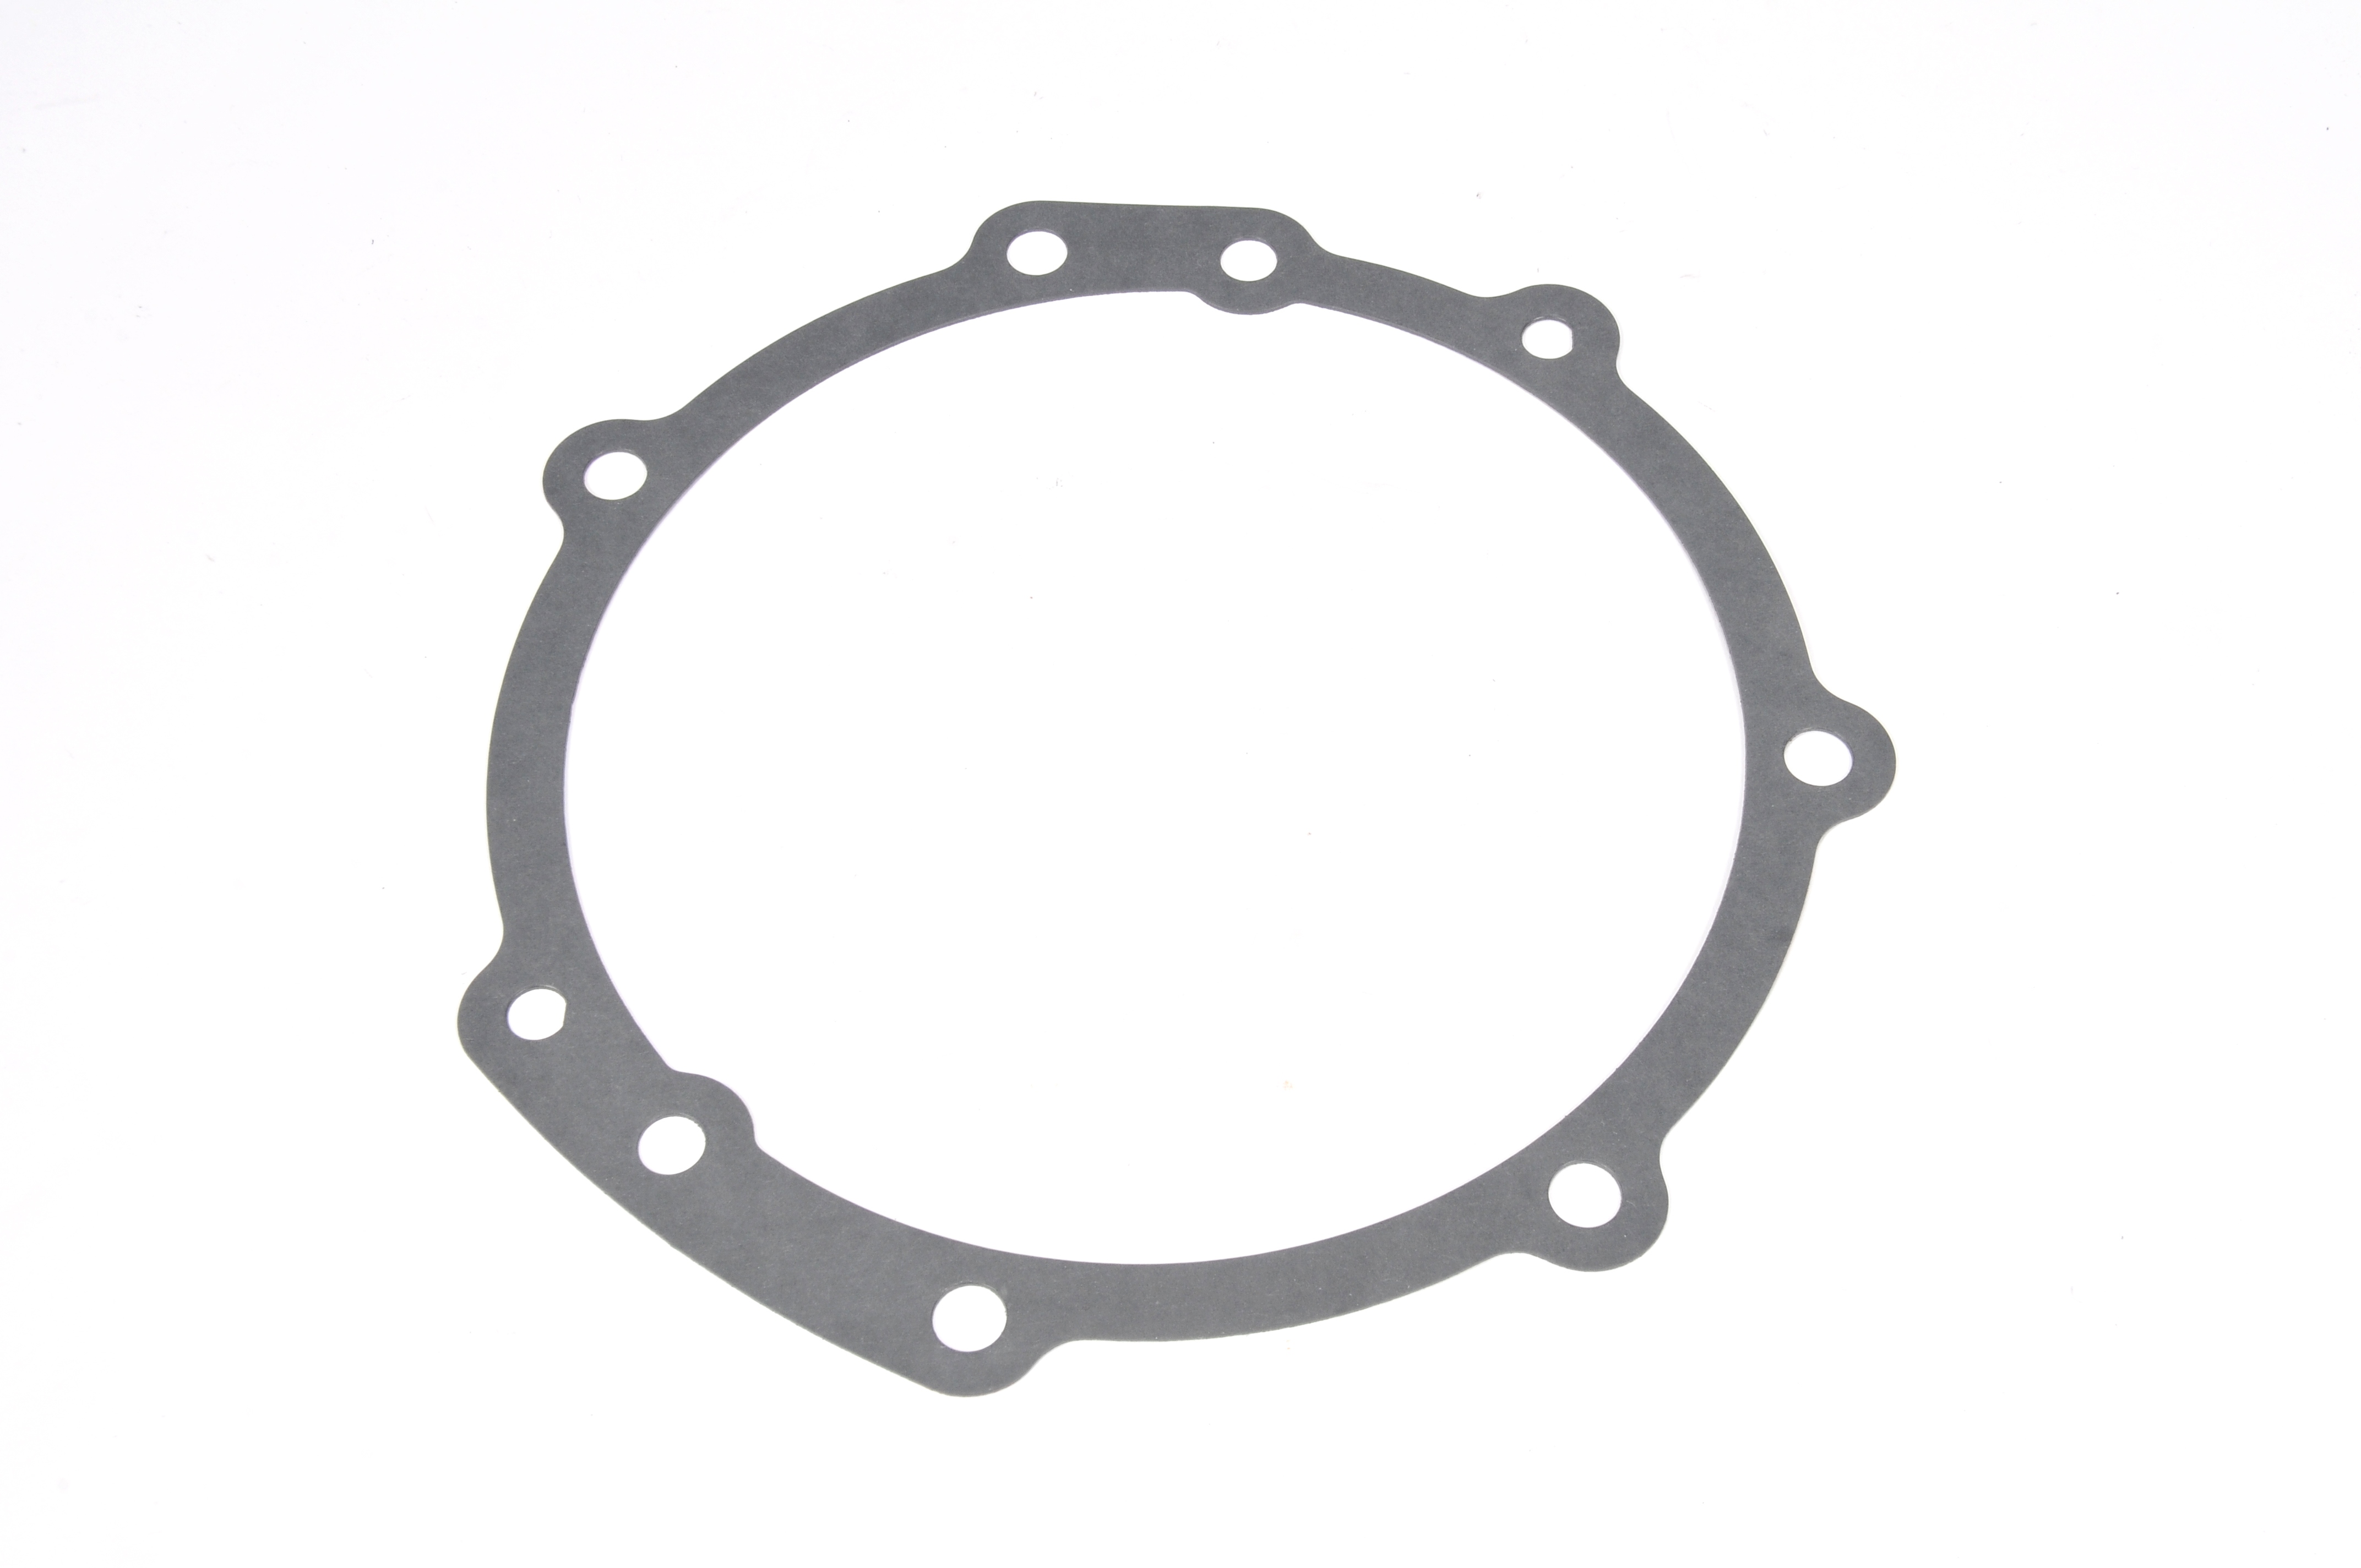 GM GENUINE PARTS - Transfer Case Adapter Gasket - GMP 94712155